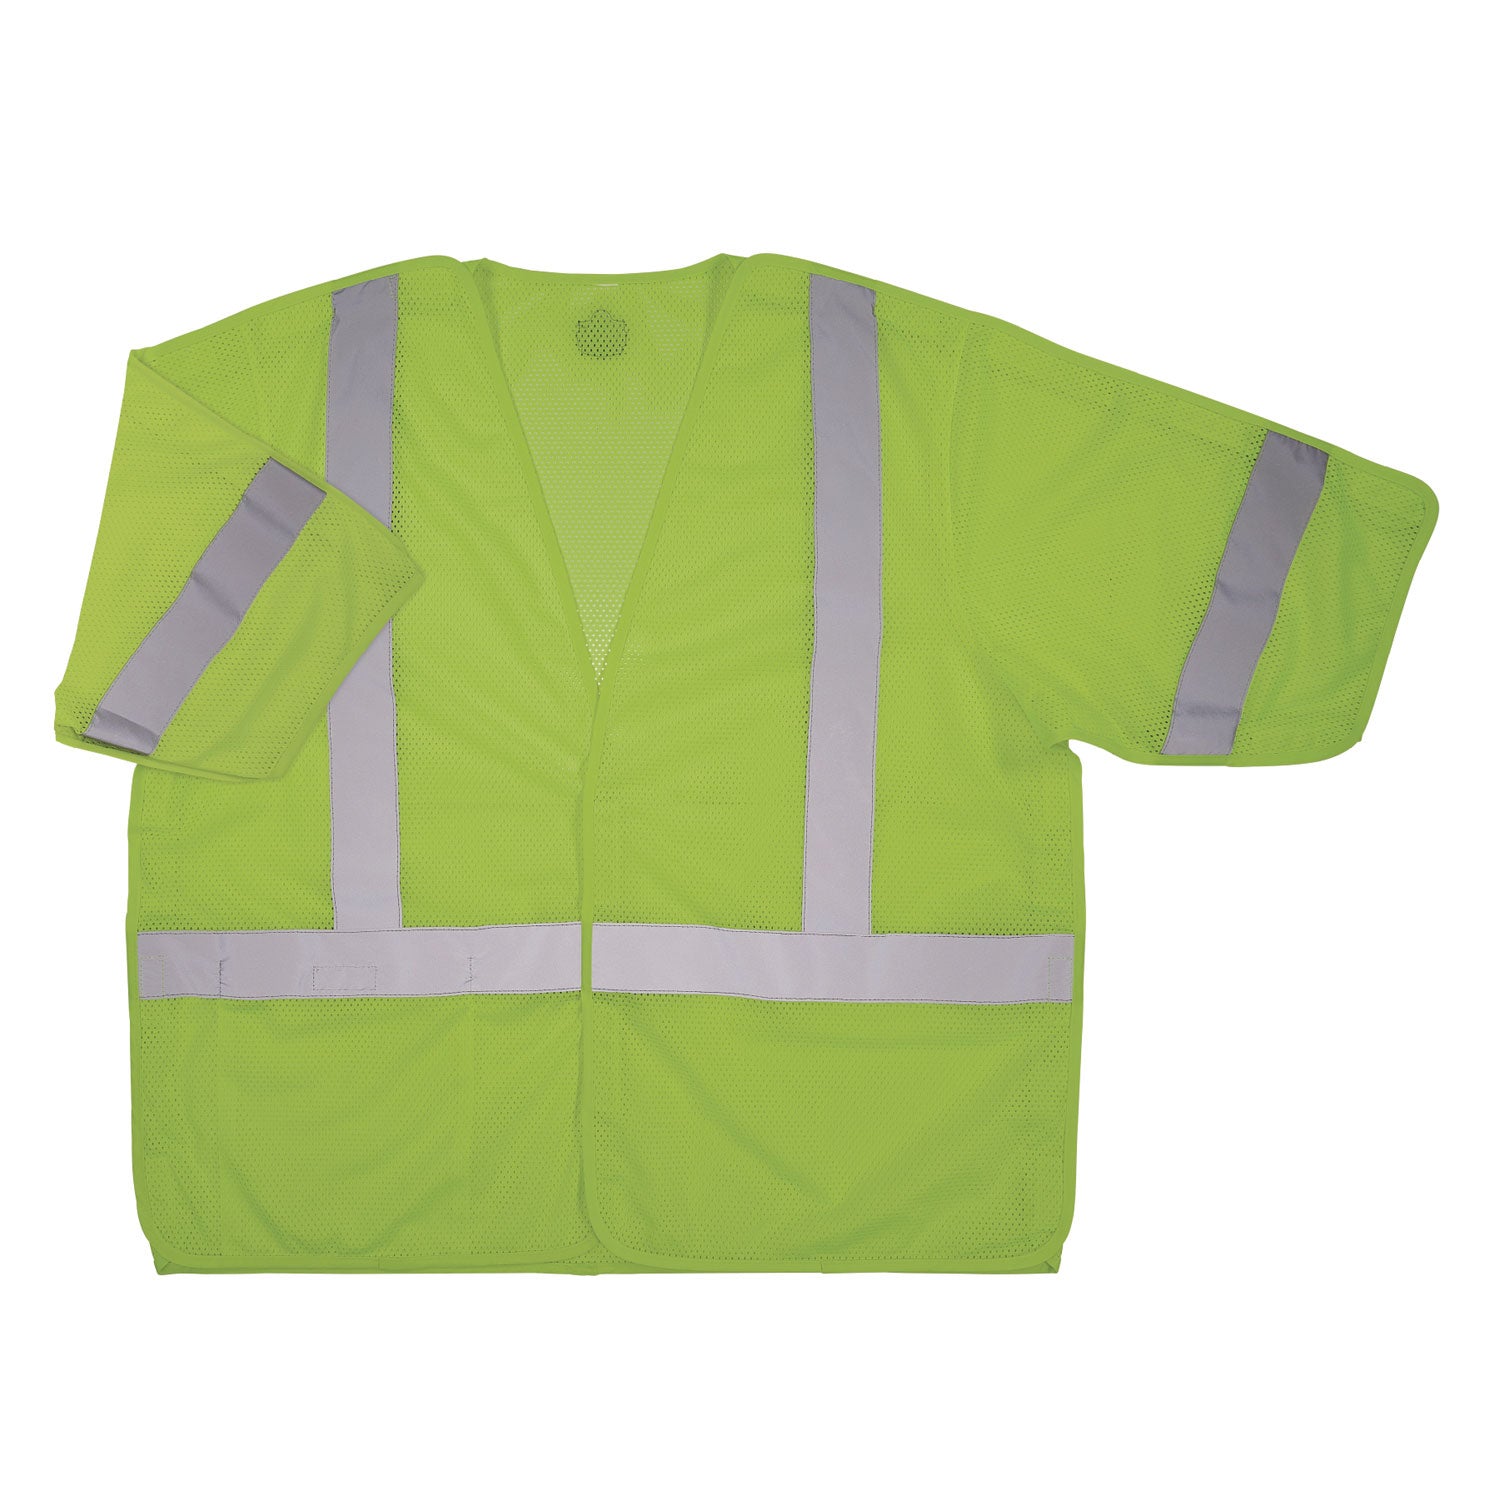 glowear-8315ba-class-3-hi-vis-breakaway-safety-vest-2x-large-to-3x-large-lime-ships-in-1-3-business-days_ego23057 - 1